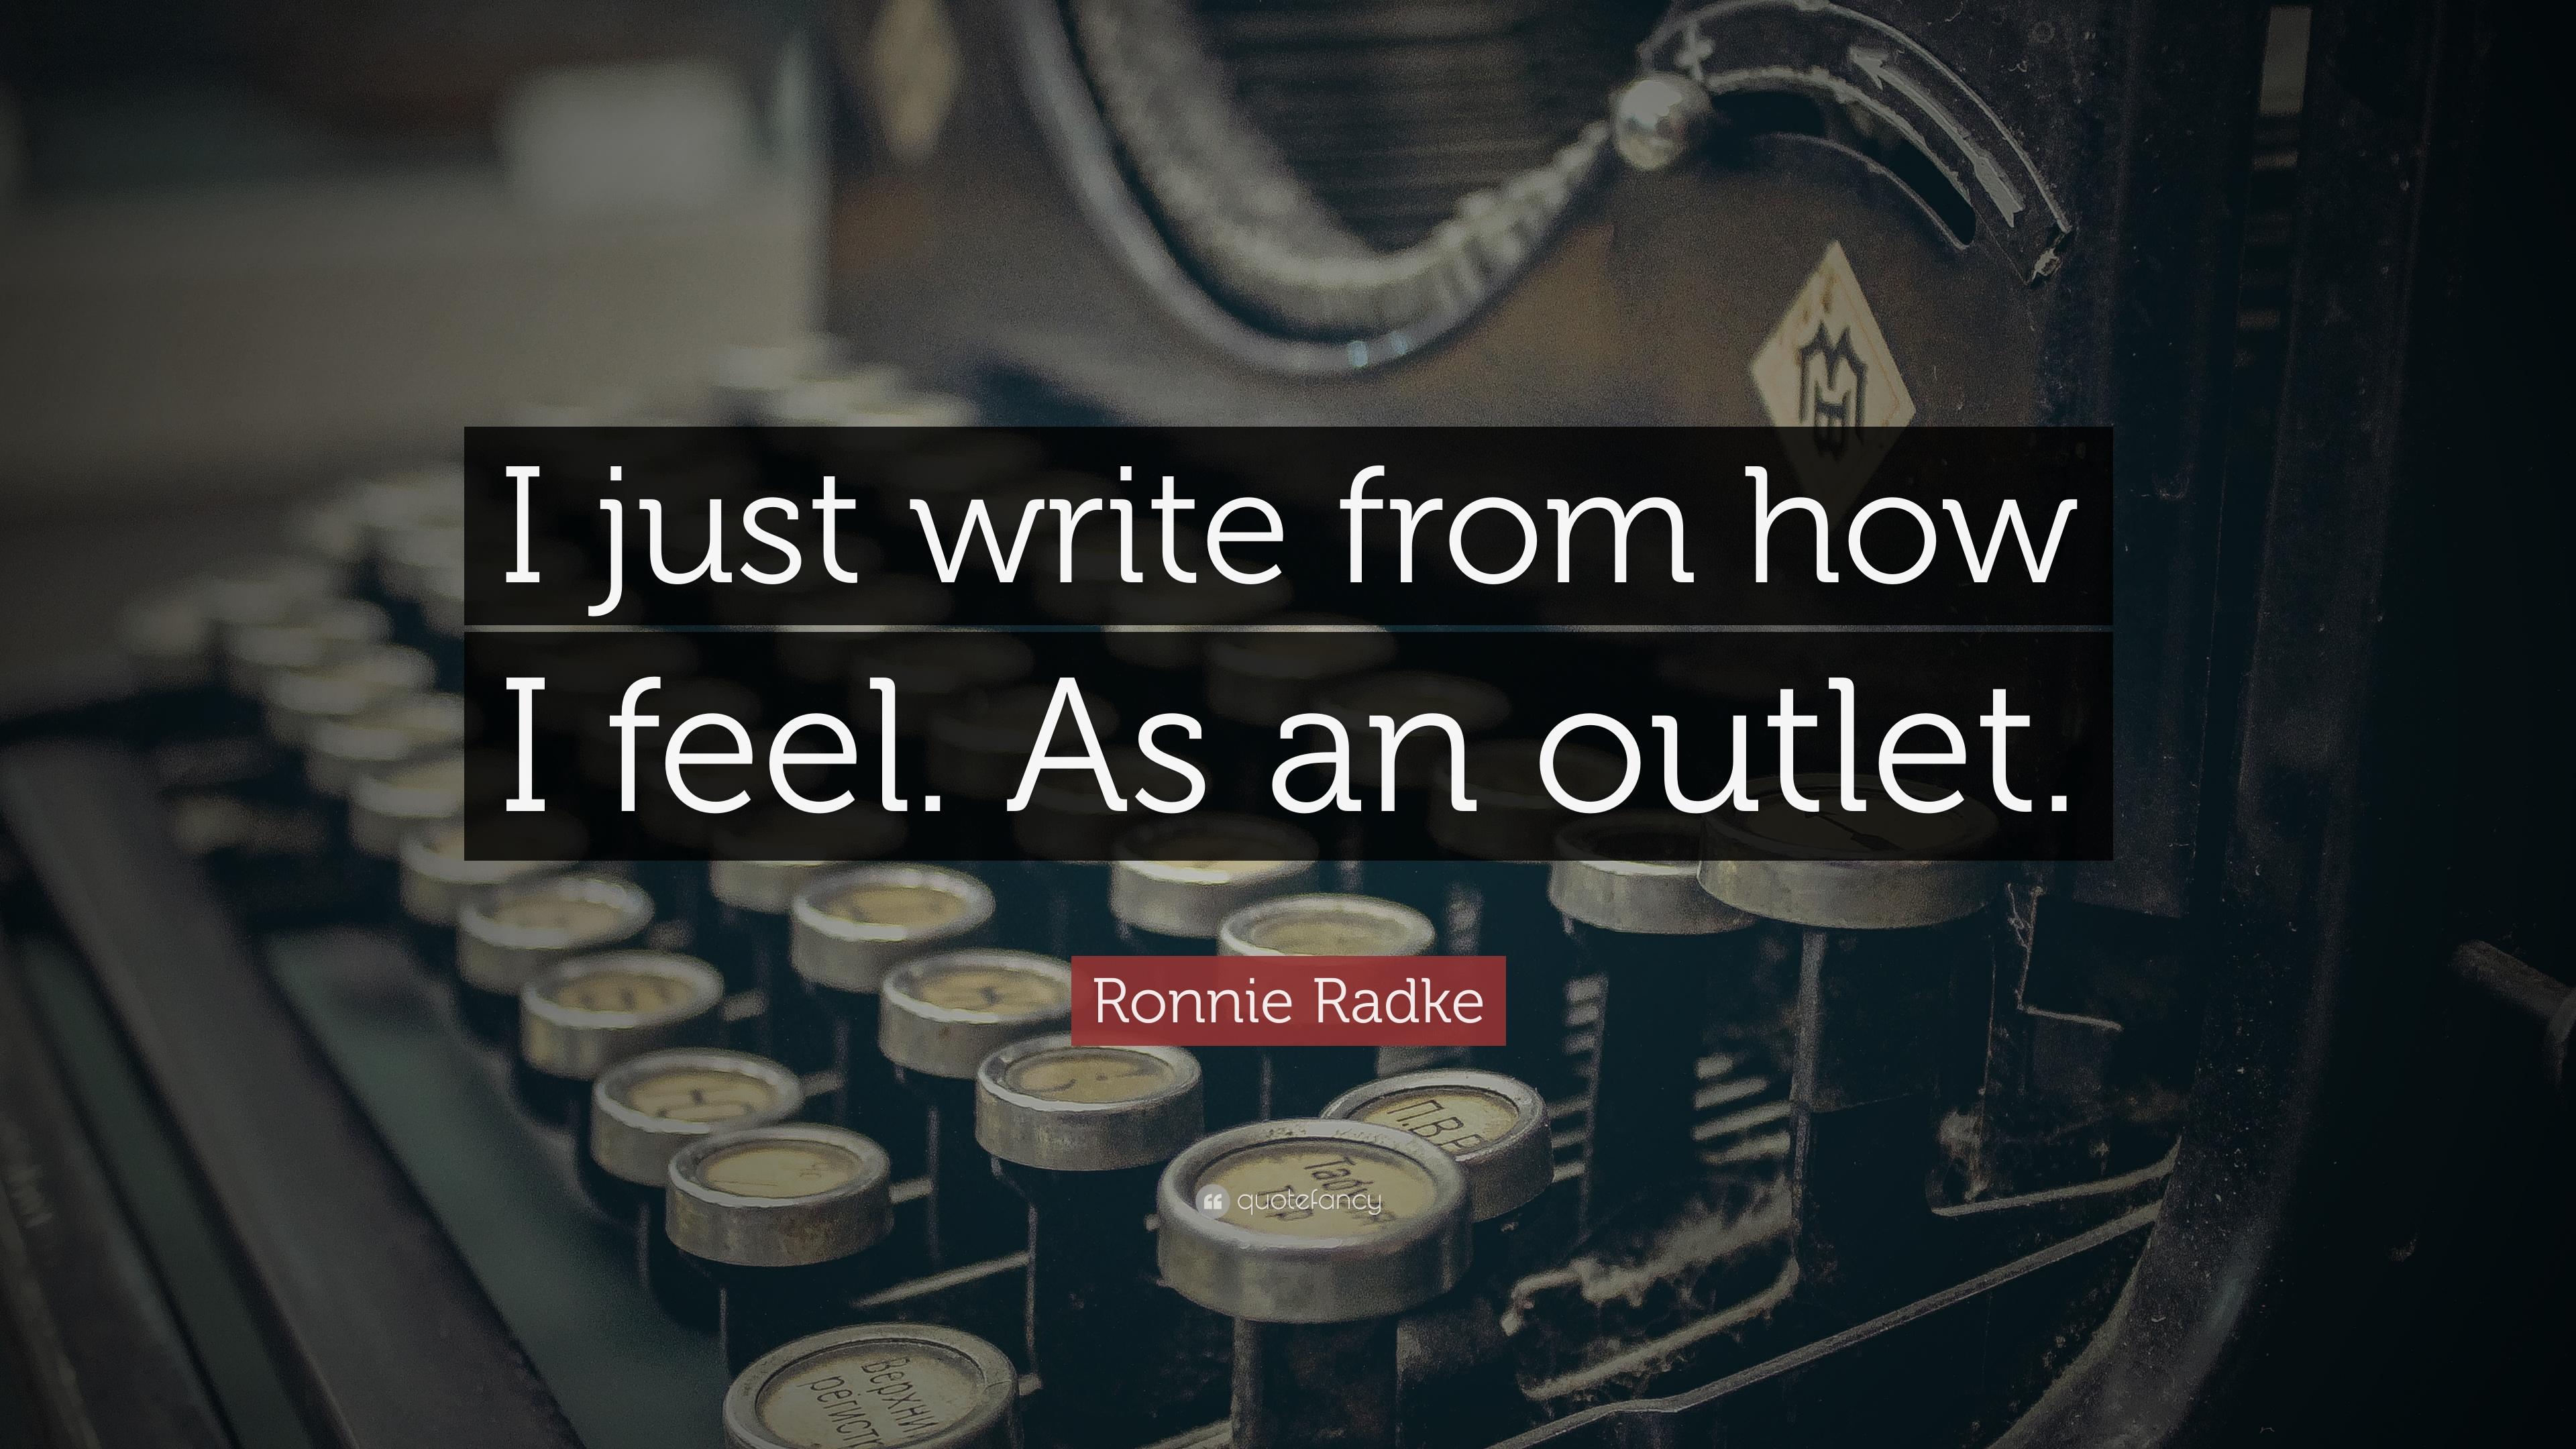 Ronnie Radke Quote: “I just write from how I feel. As an outlet.” 7